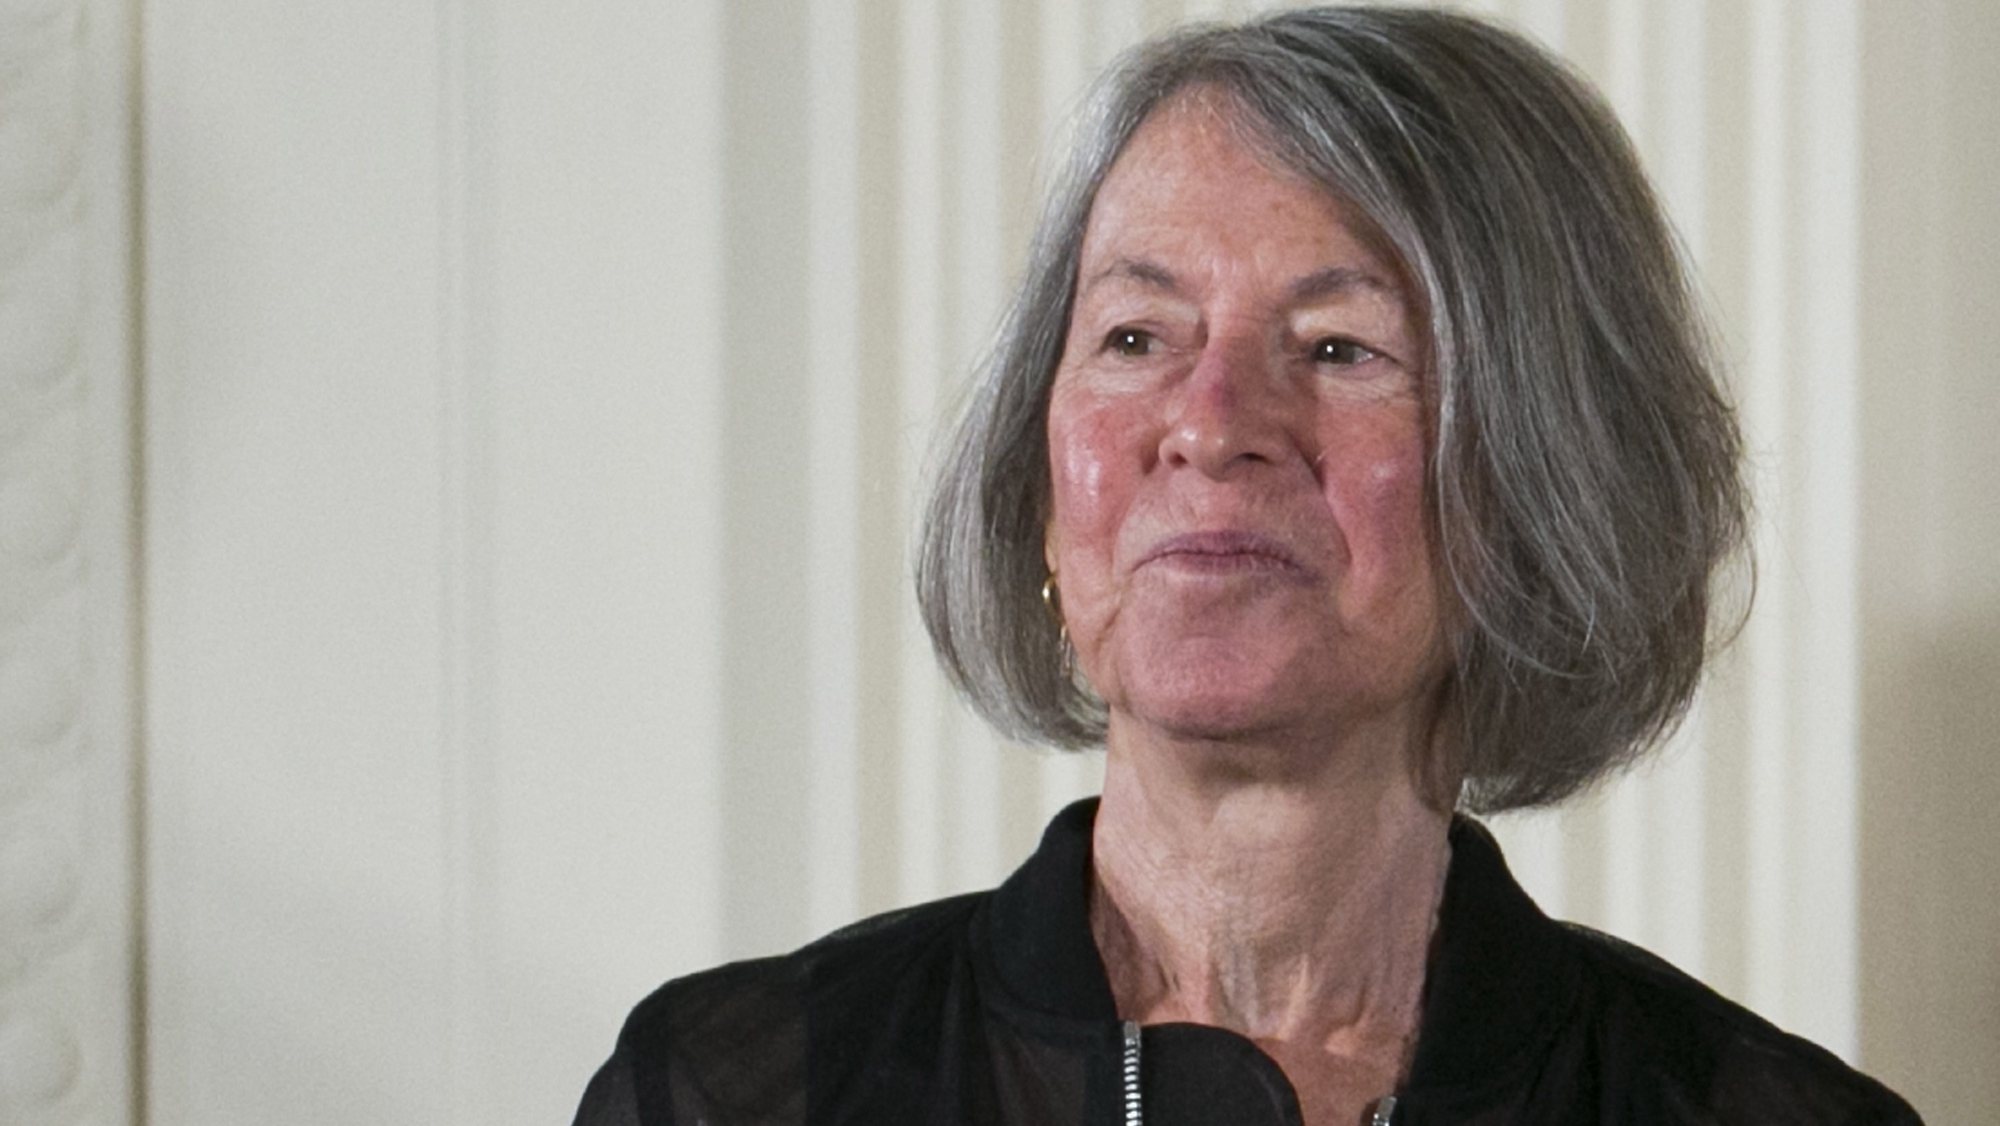 epa08728920 (FILE) - US poet Louise Gluck with the 2015 National Humanities Medal during a ceremony in the East Room of the White House in Washington, DC, USA, 22 September 2016 (reissued 08 October 2020). The 2020 Nobel Prize in Literature has been awarded to Louise Glueck, the Swedish Academy has announced.  EPA/SHAWN THEW *** Local Caption *** 53031868